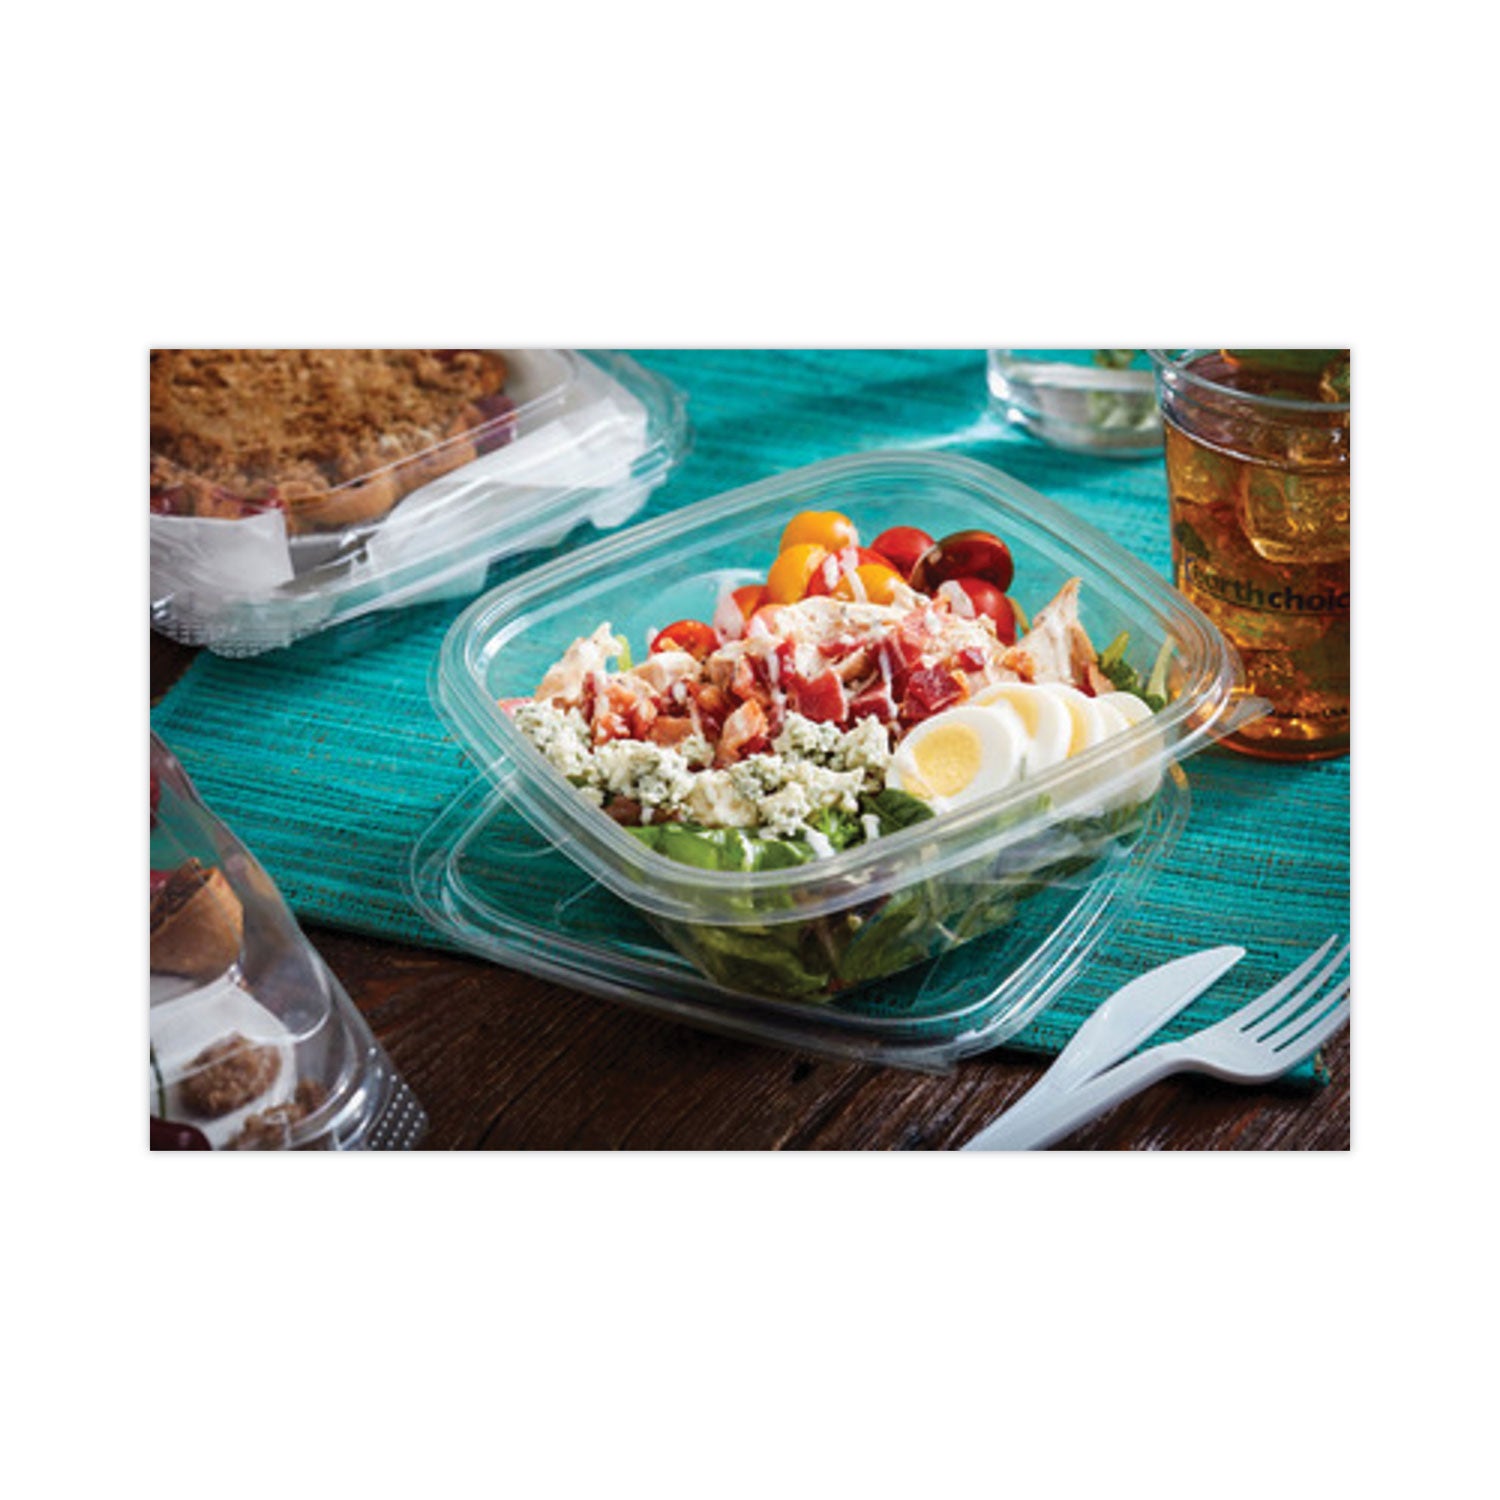 earthchoice-square-recycled-bowl-32-oz-7-x-7-x-2-clear-plastic-300-carton_pctsac0732 - 7